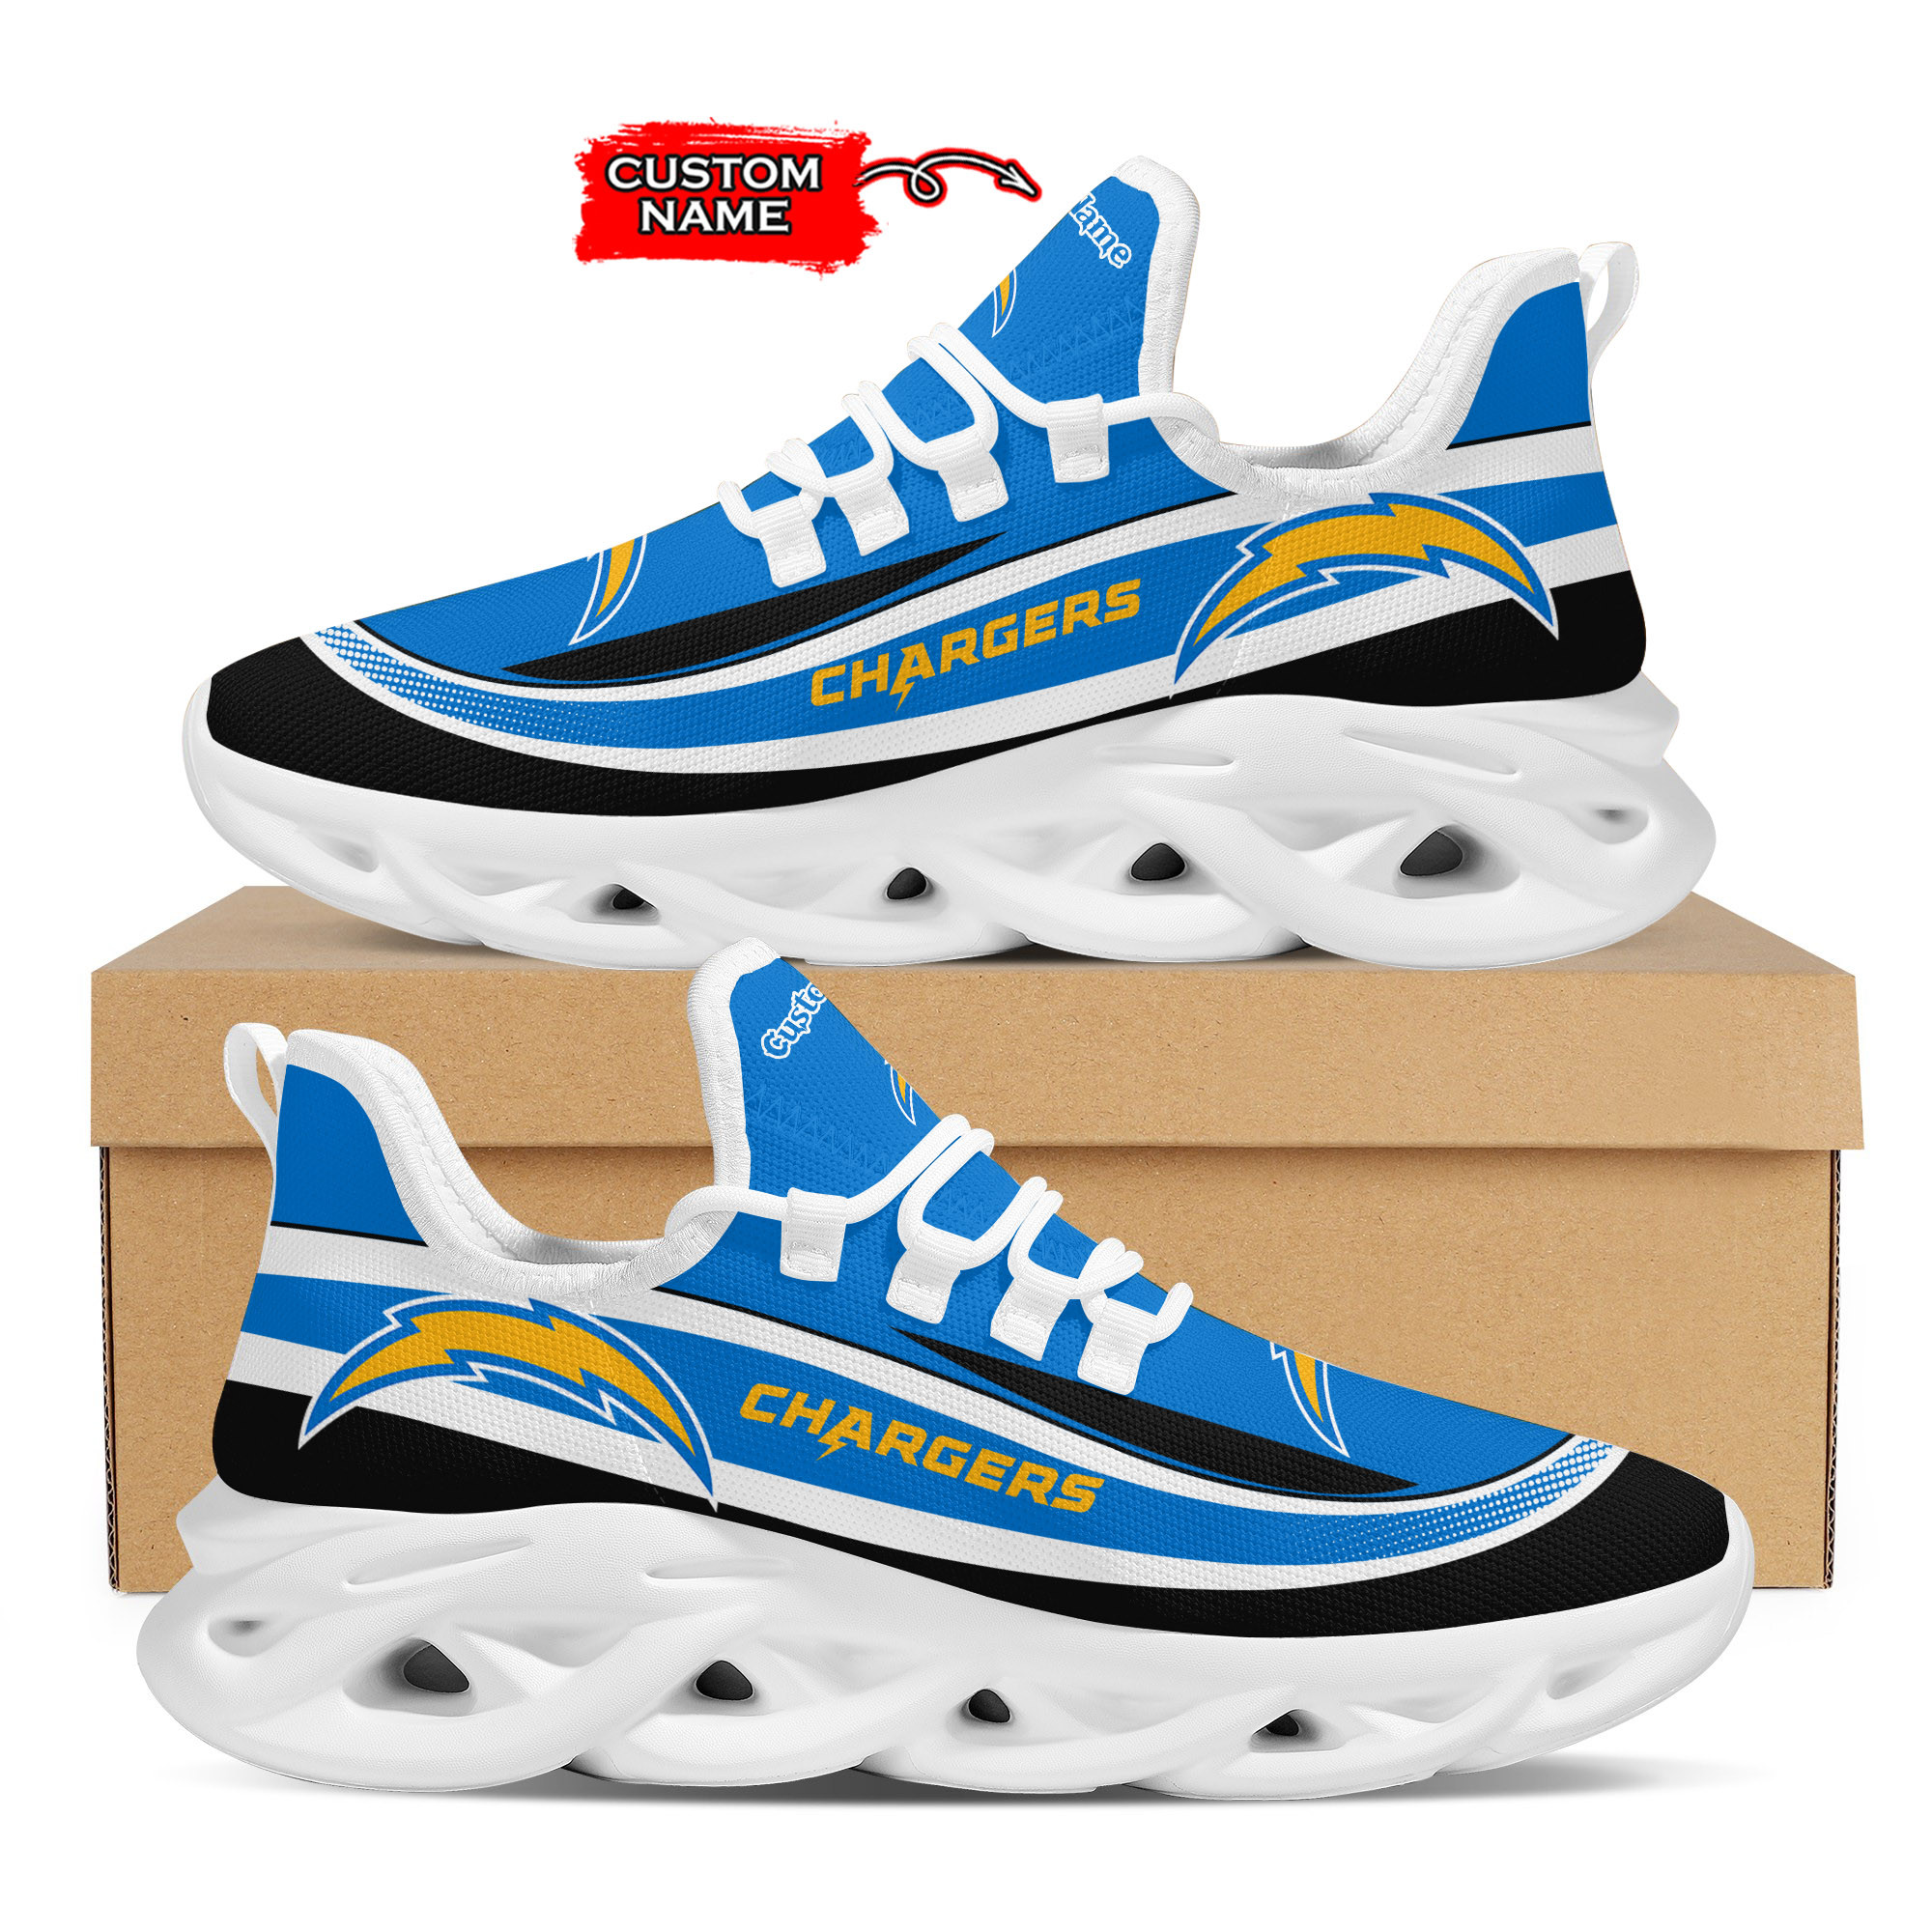 Los Angeles Chargers Nfl Custom Name Clunky Max Soul Shoes Sneakers For Mens Womens Personalized Gifts – Hothot